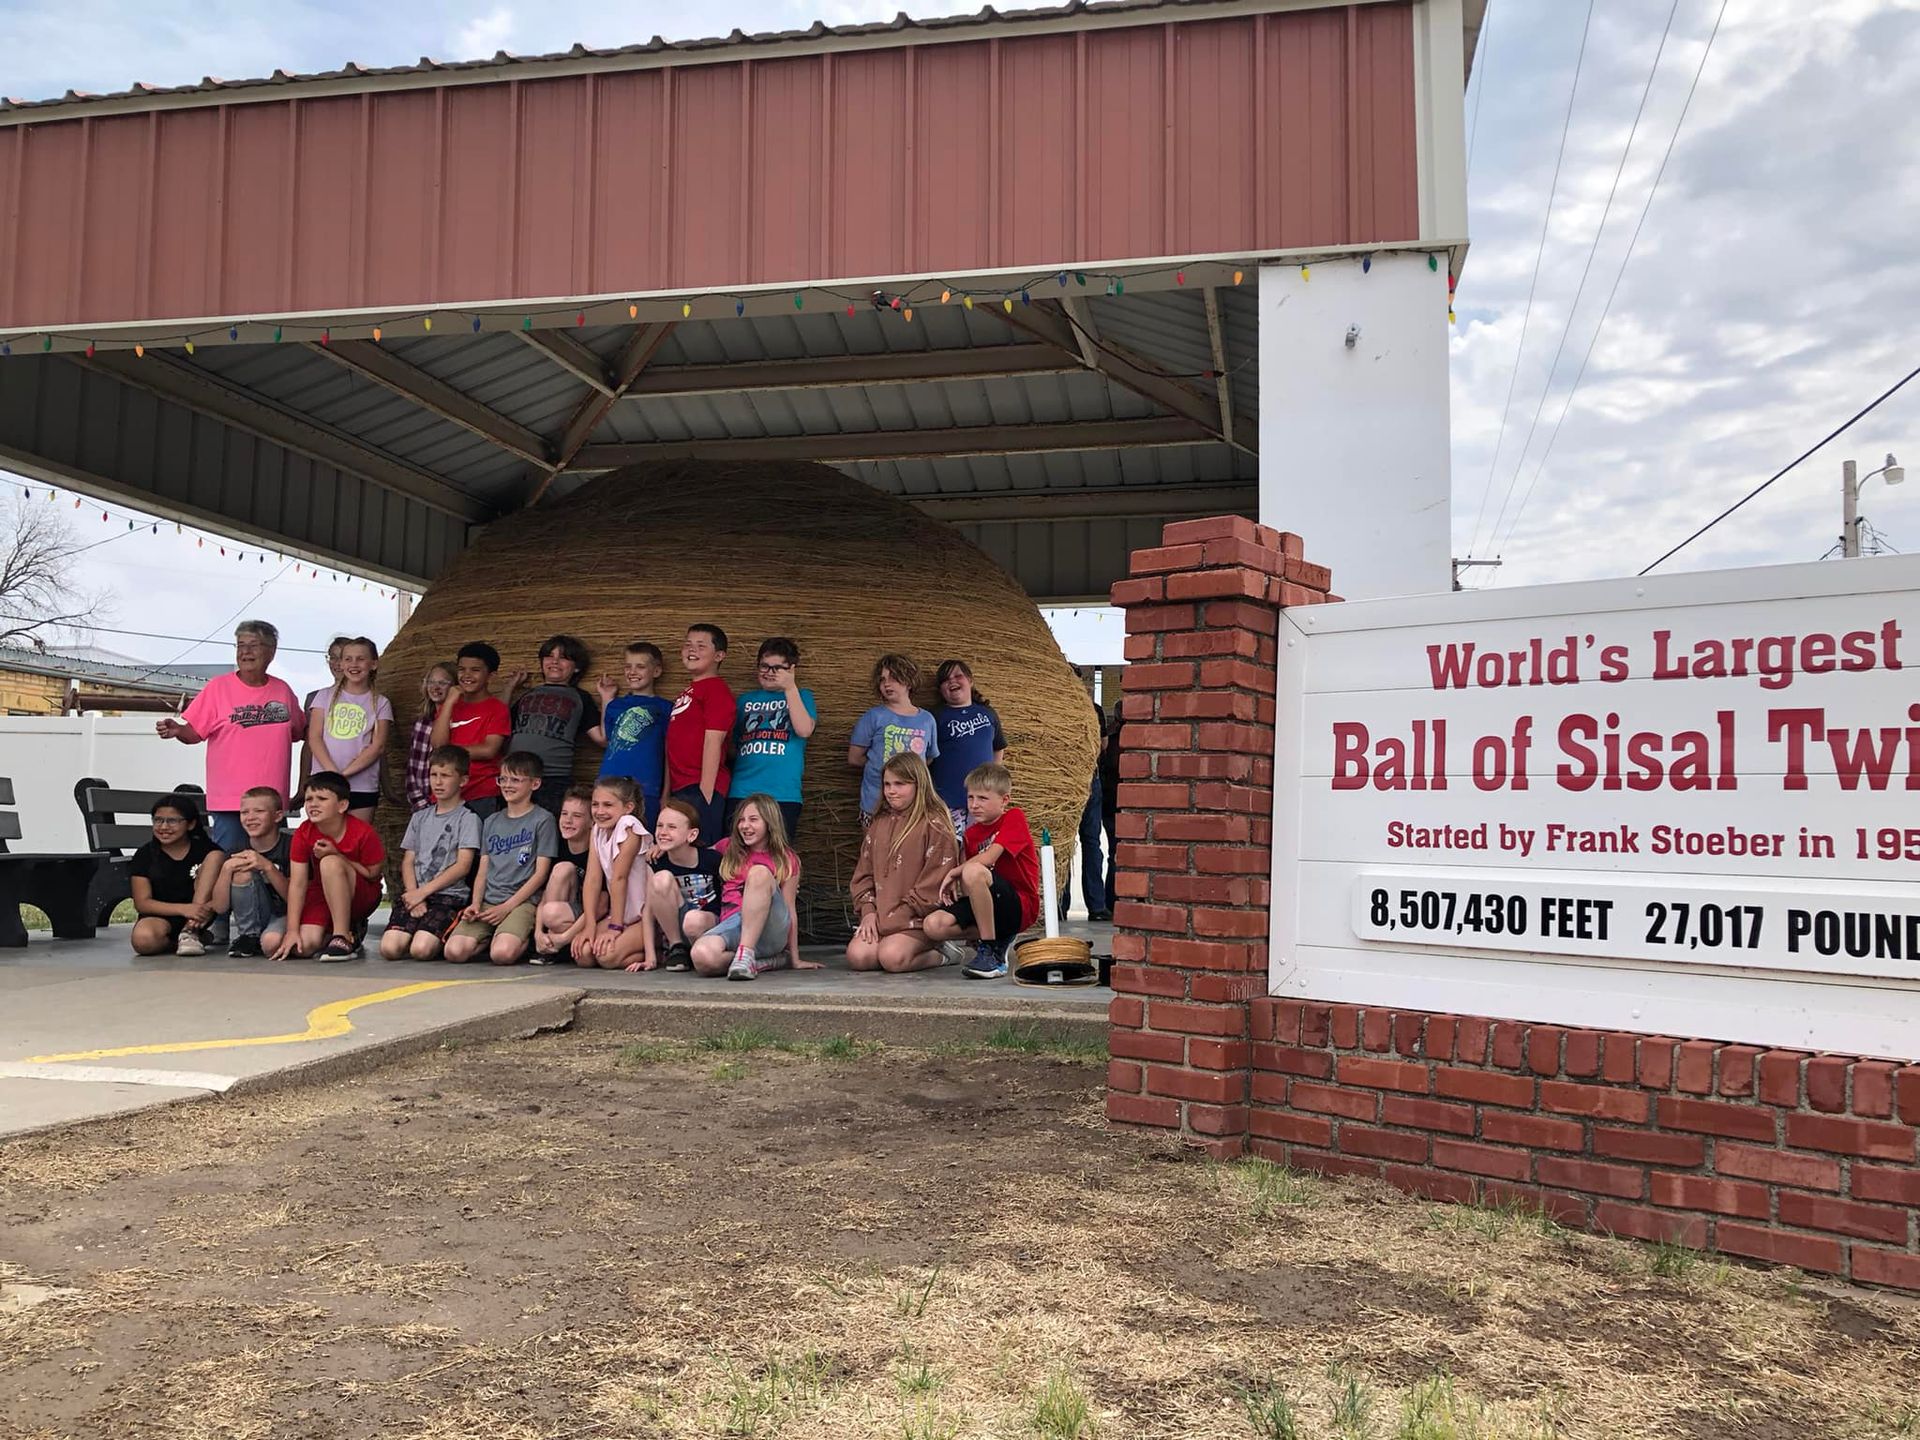 
World’s Largest Ball of Sisal Twine: world record in Cawker City, Kansas